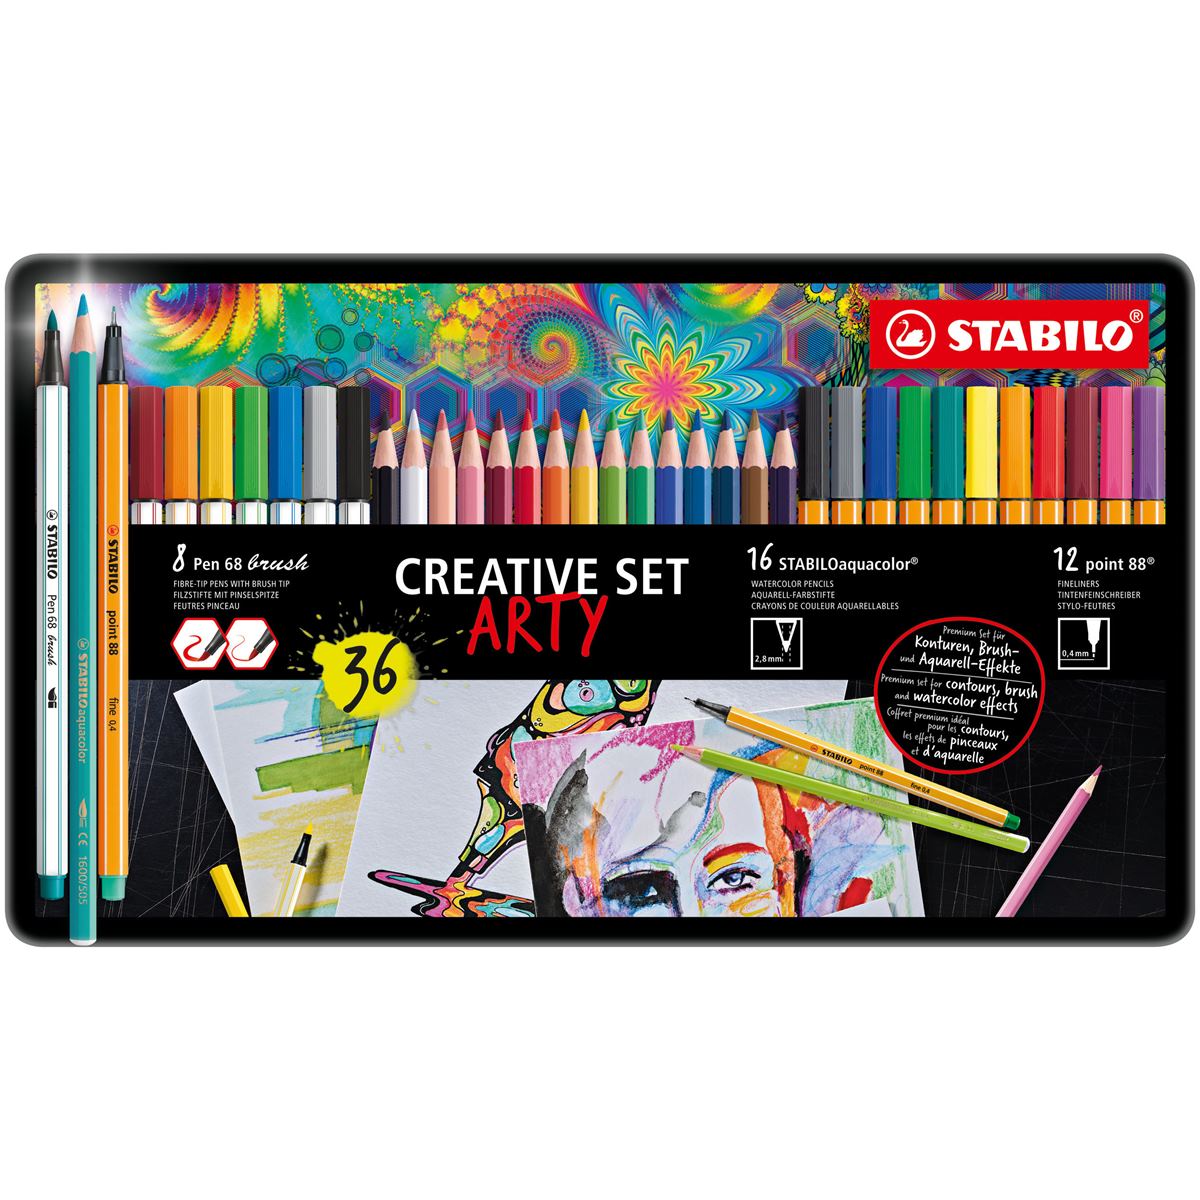 STABILO Assorted Art Set - STABILOaquacolor, Pen 68 Brush & Point 88 Arty - Tin of 36